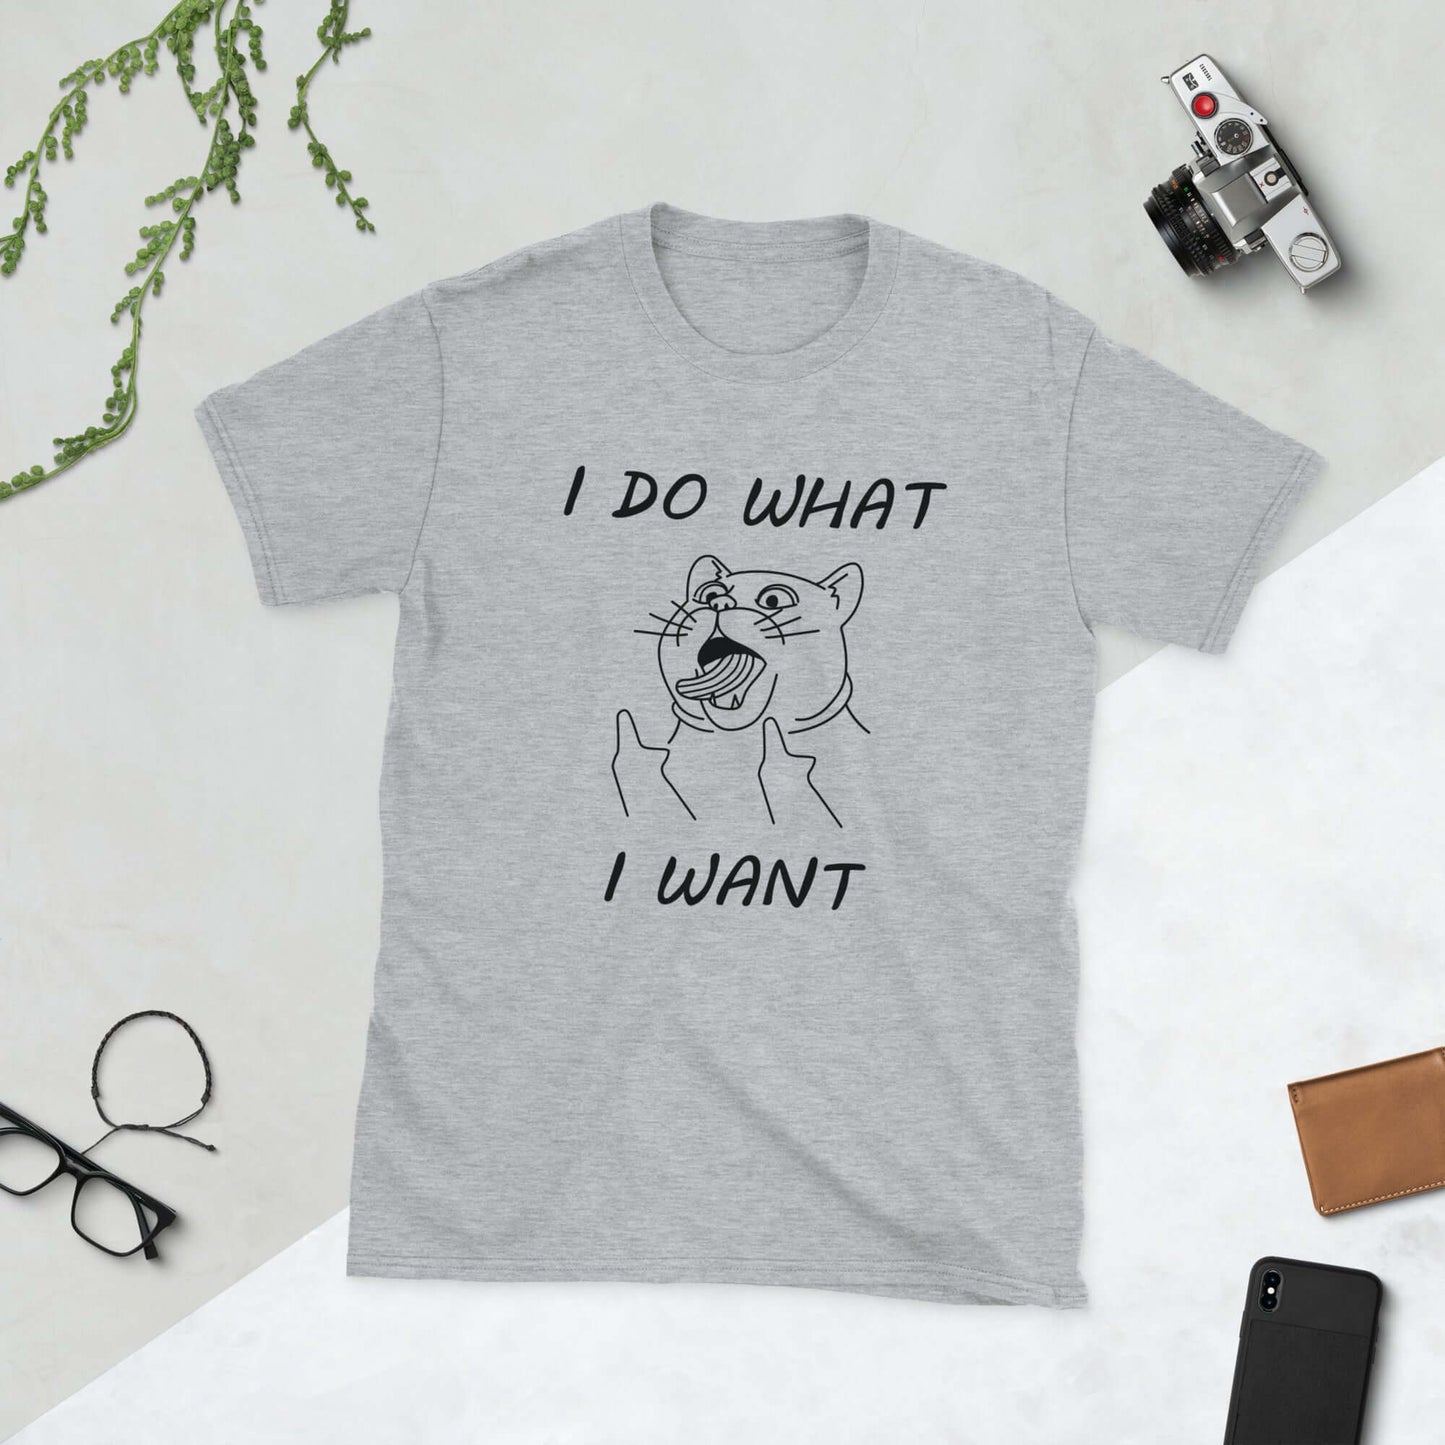 Light grey t-shirt with cat flipping middle fingers and the words I do what I want printed on the front.